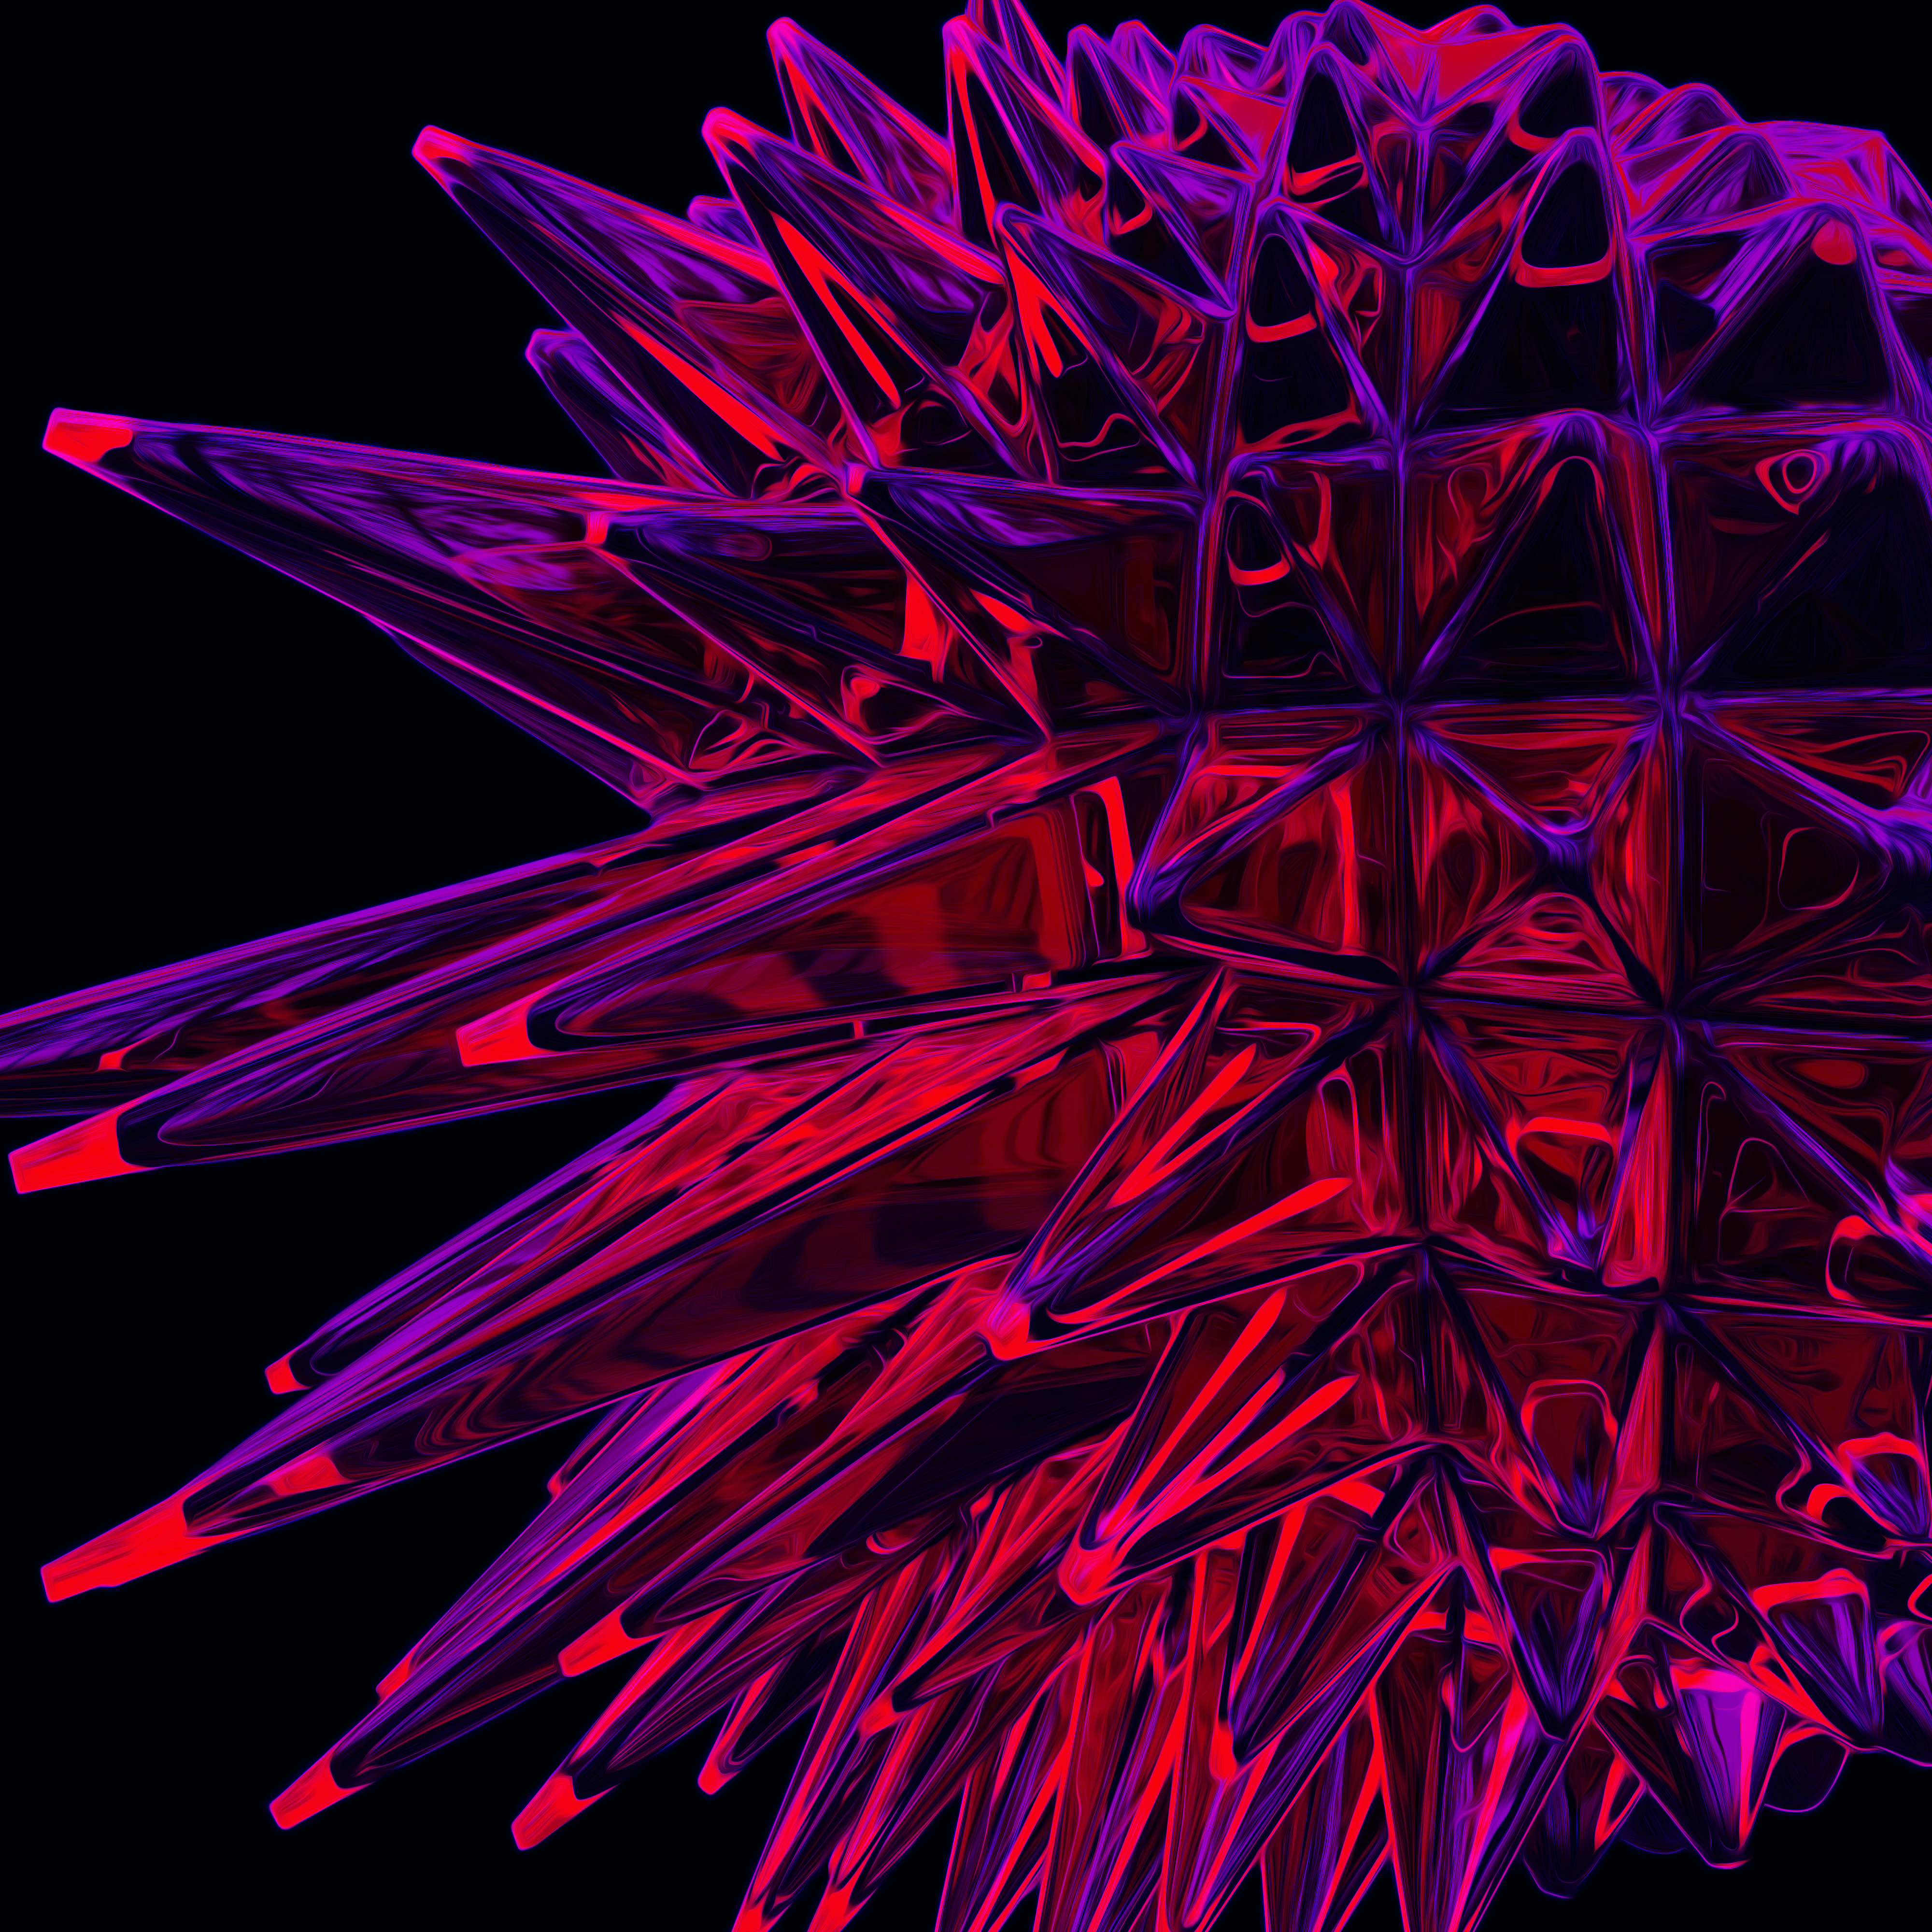 crystal, 3d, sharp, acute, purple, violet, red, structure, barbed, spiny